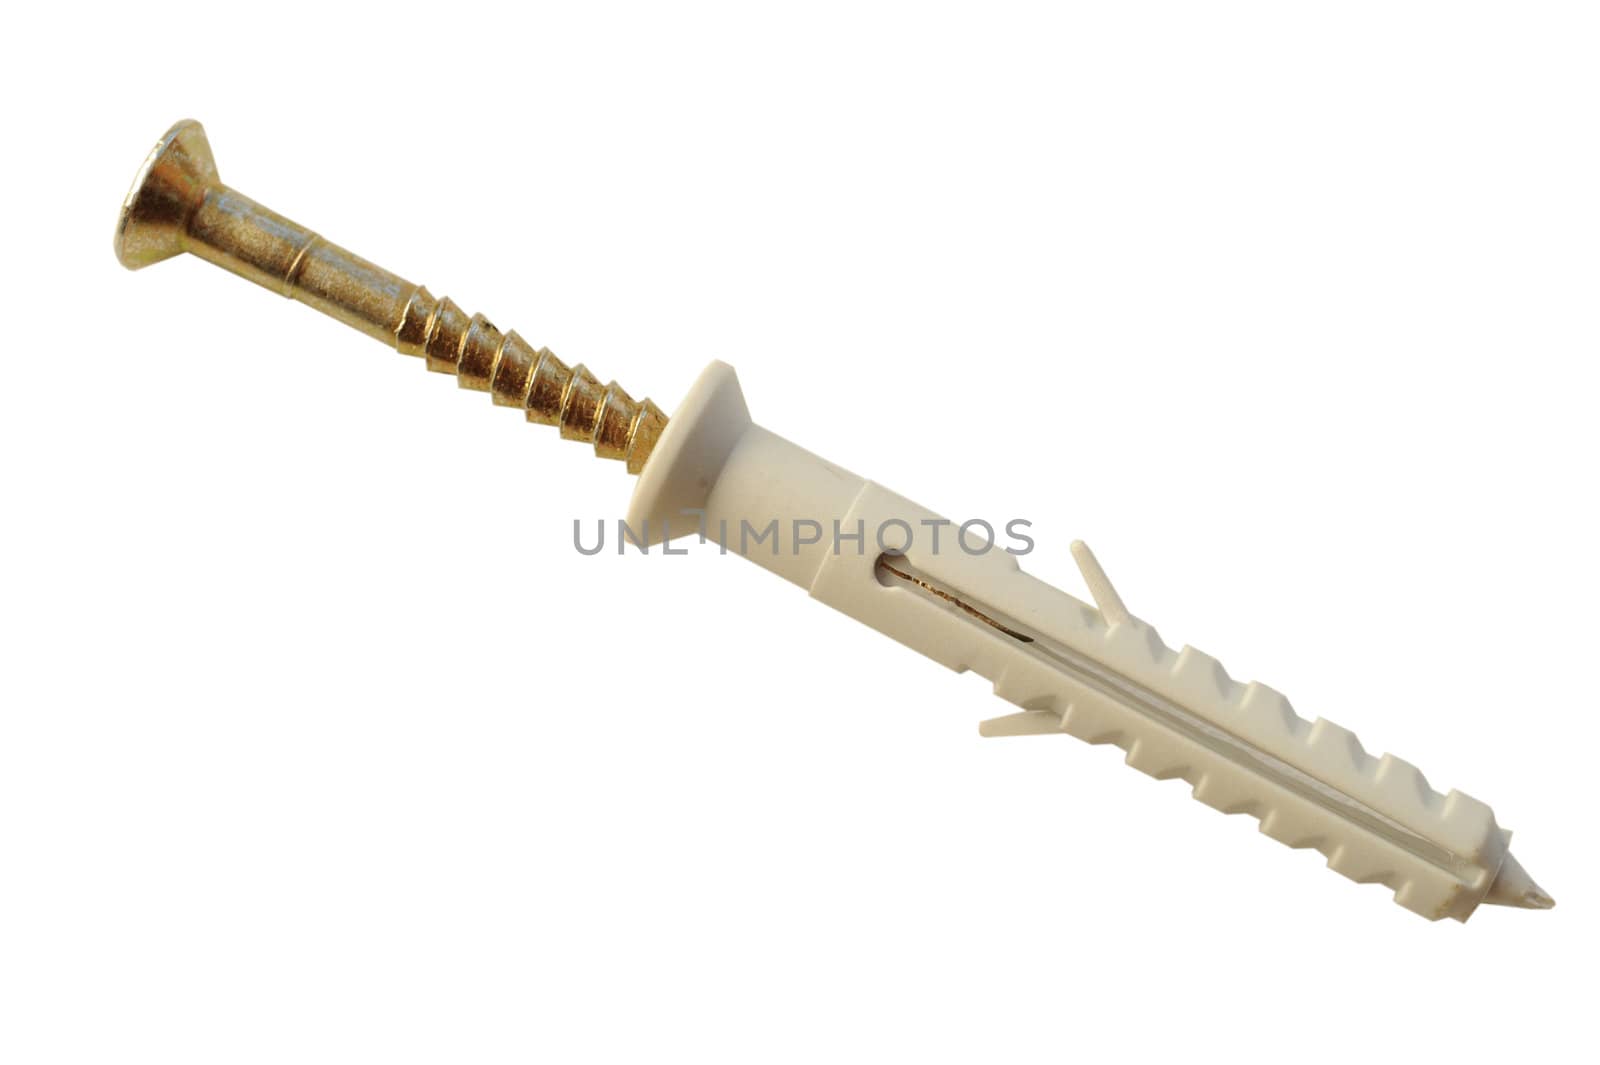 Screw and dowel isolated and a white background